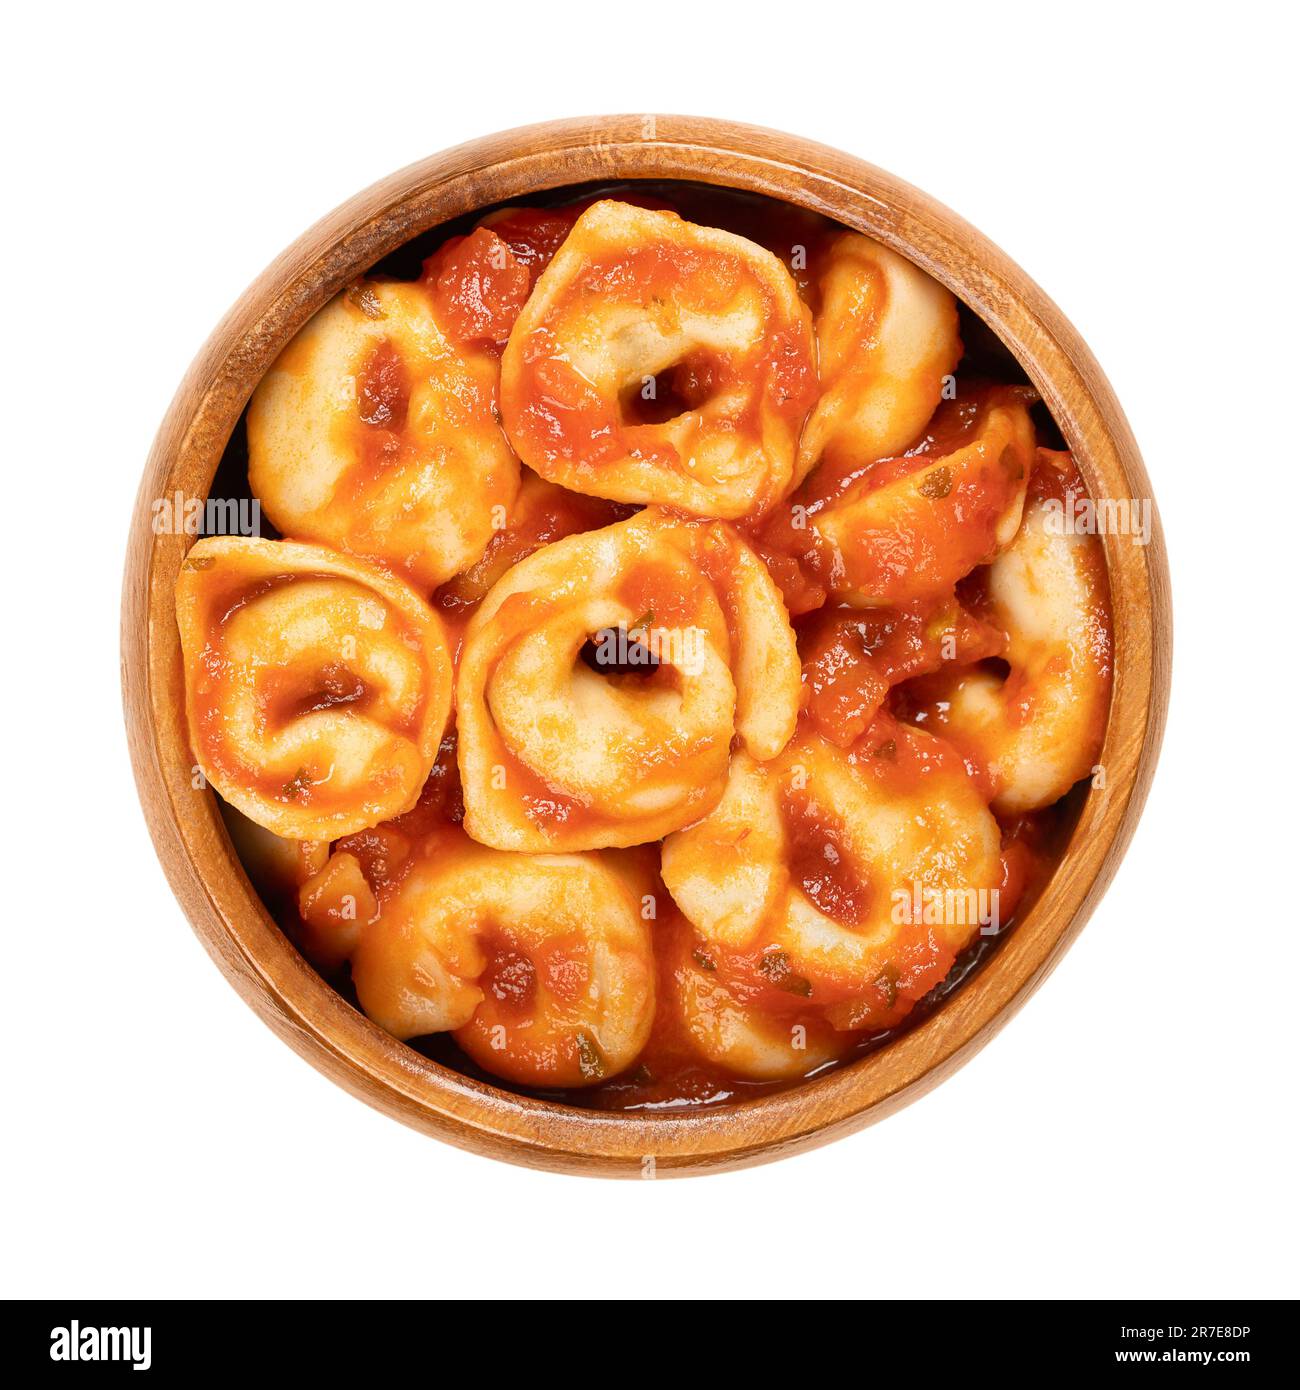 Boiled tortellini, dressed in tomato sauce, in a wooden bowl. Industrially made, stuffed dumplings. Italian pasta, made of durum wheat semolina. Stock Photo